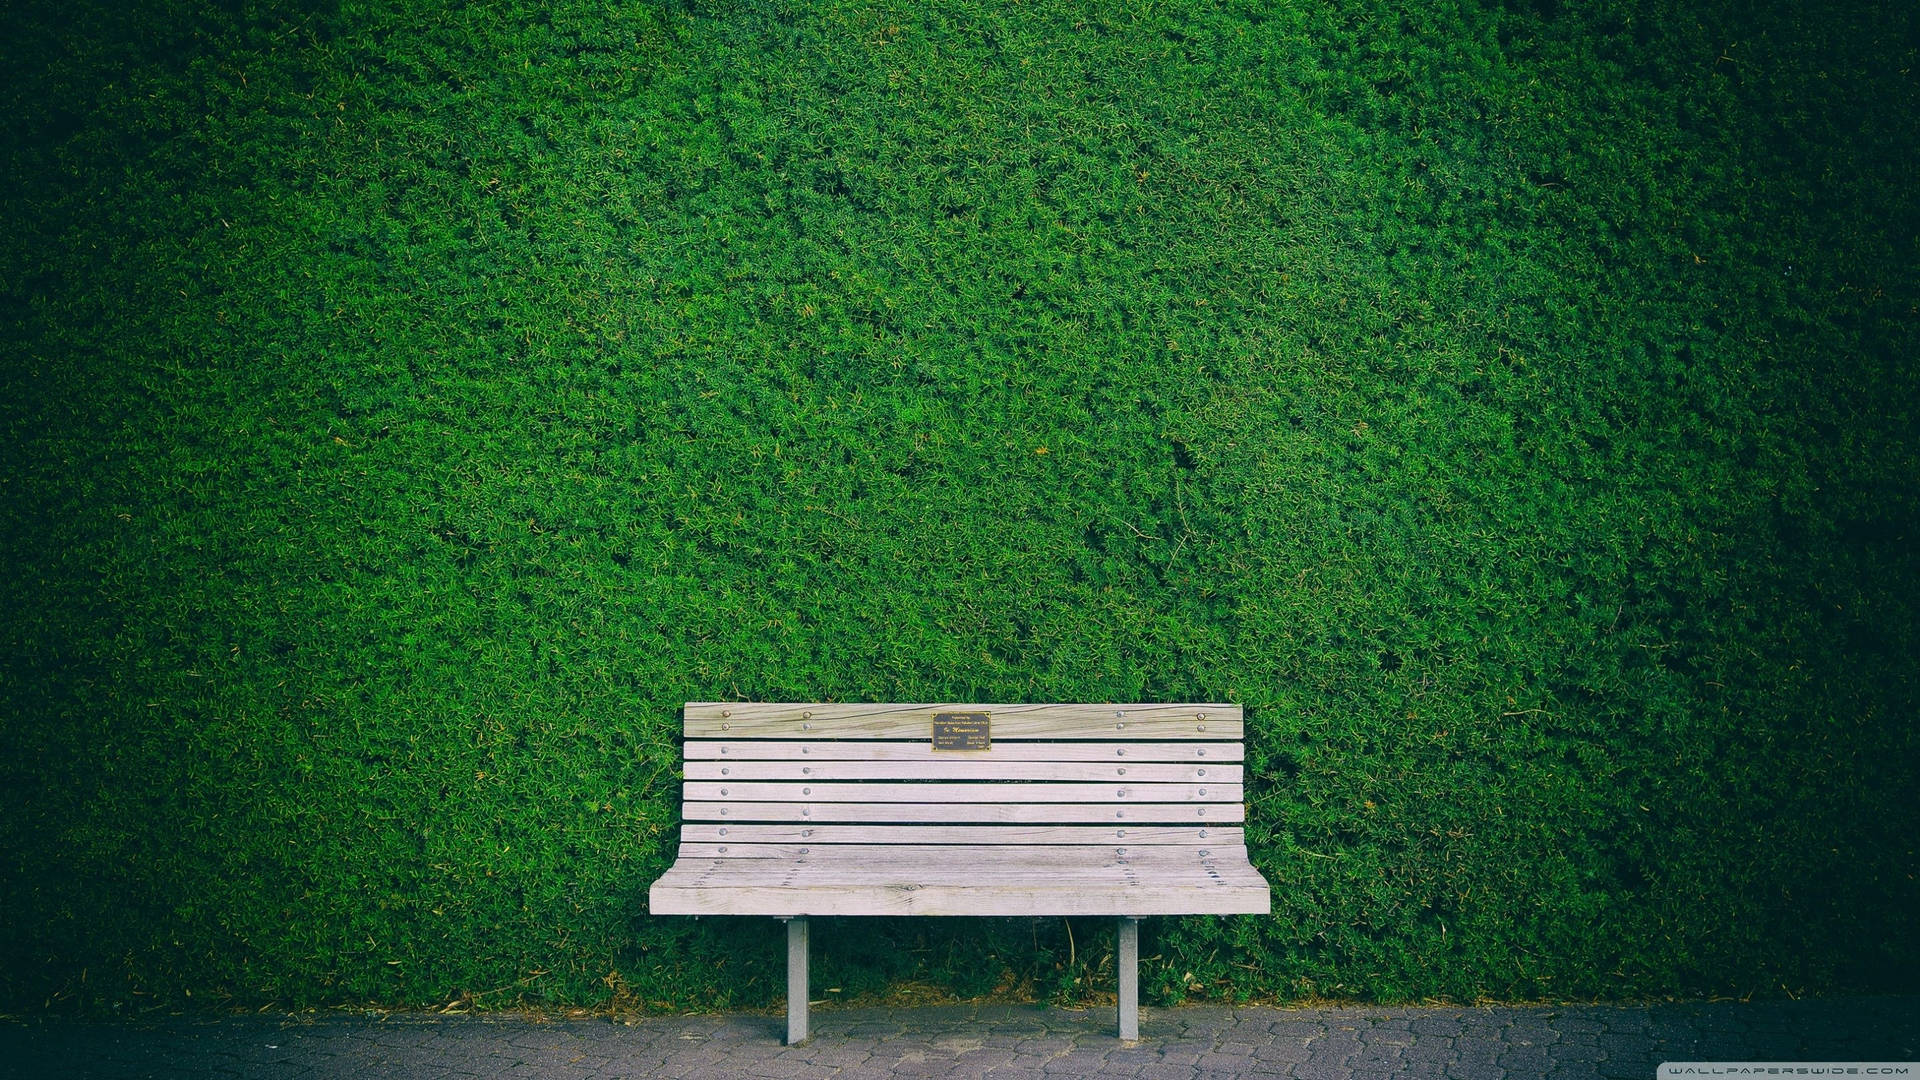 Solitary Bench Against a Mossy Green Wall Wallpaper